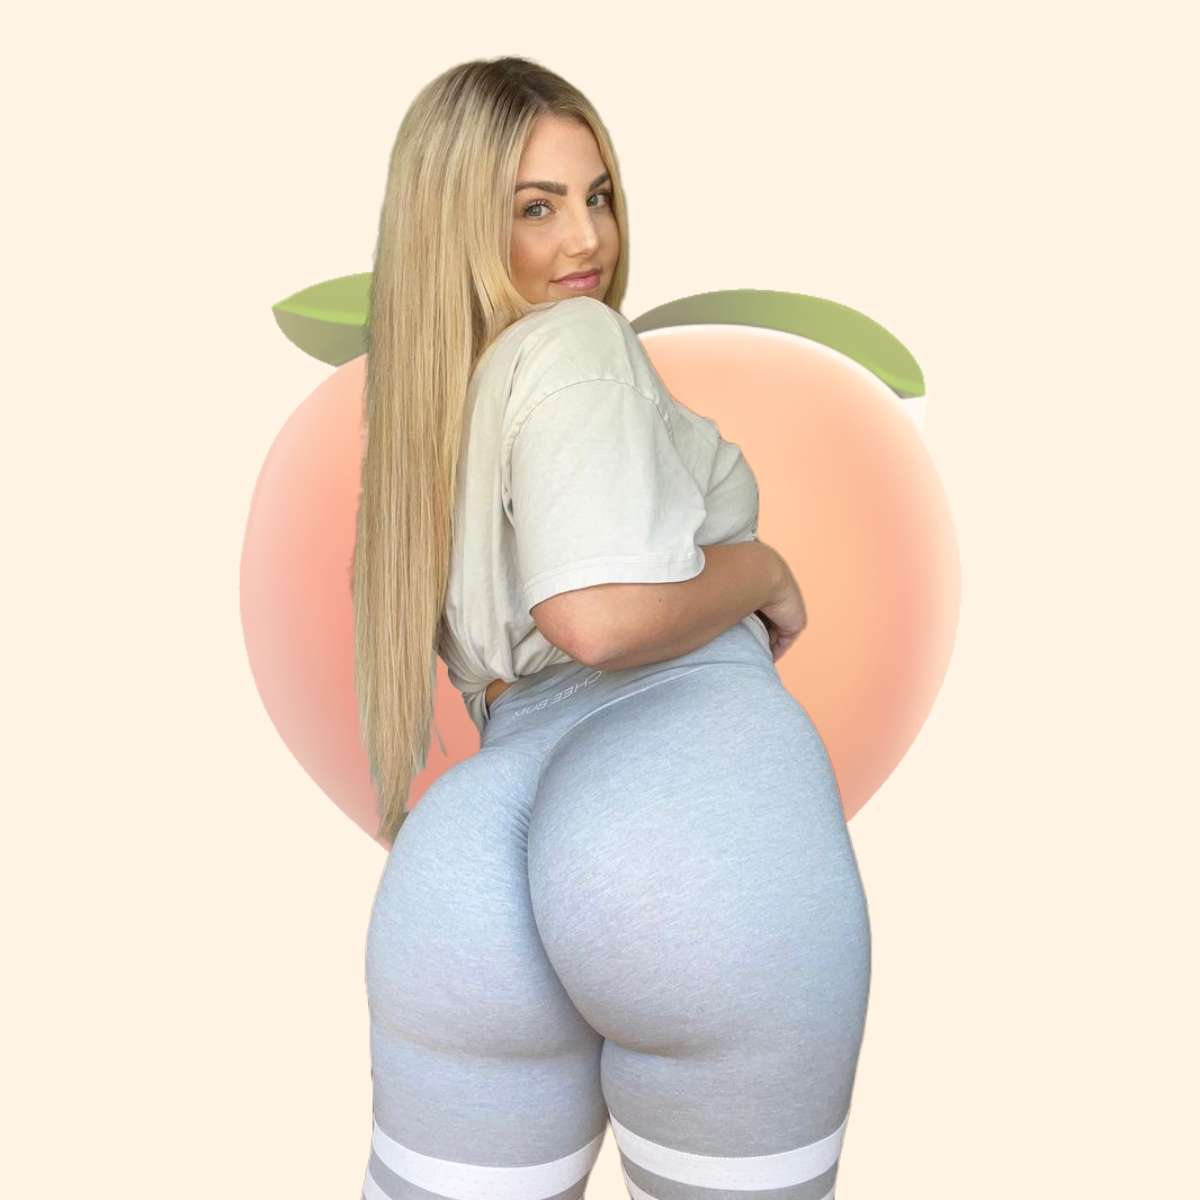 BIG PEACH BUTT puzzle online from photo